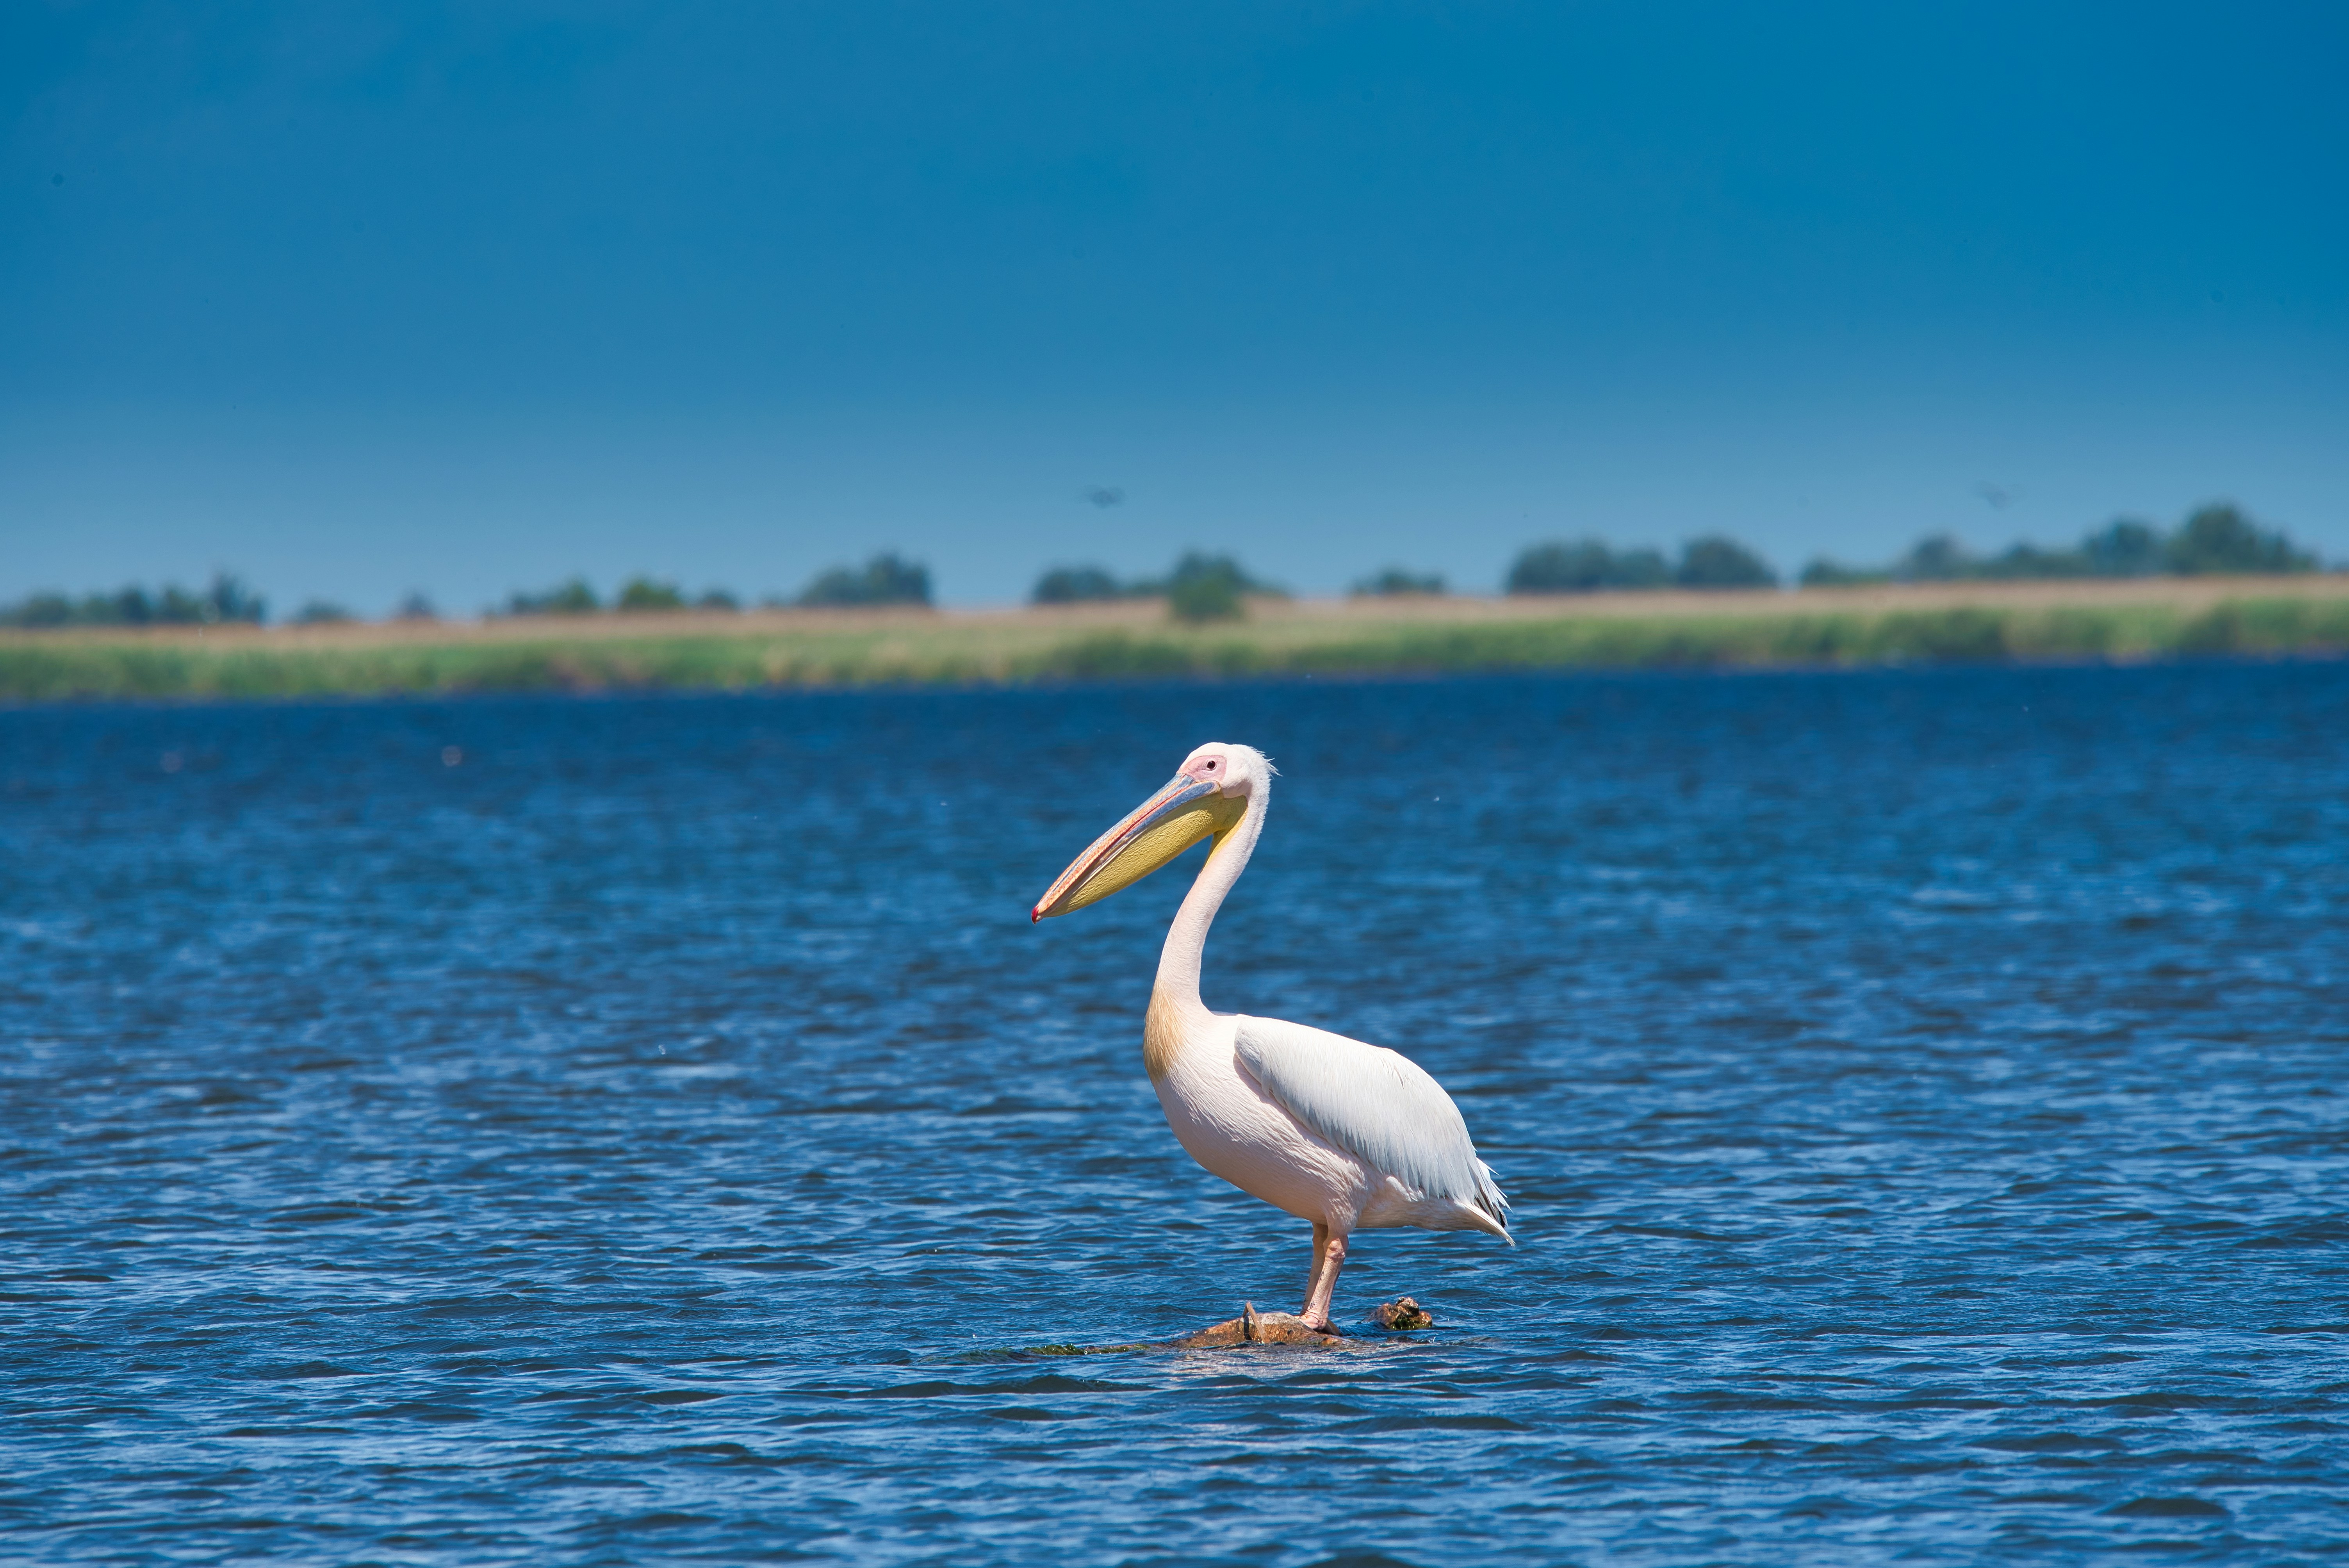 A common pelican resting in the middle of a lake in Danube Delta